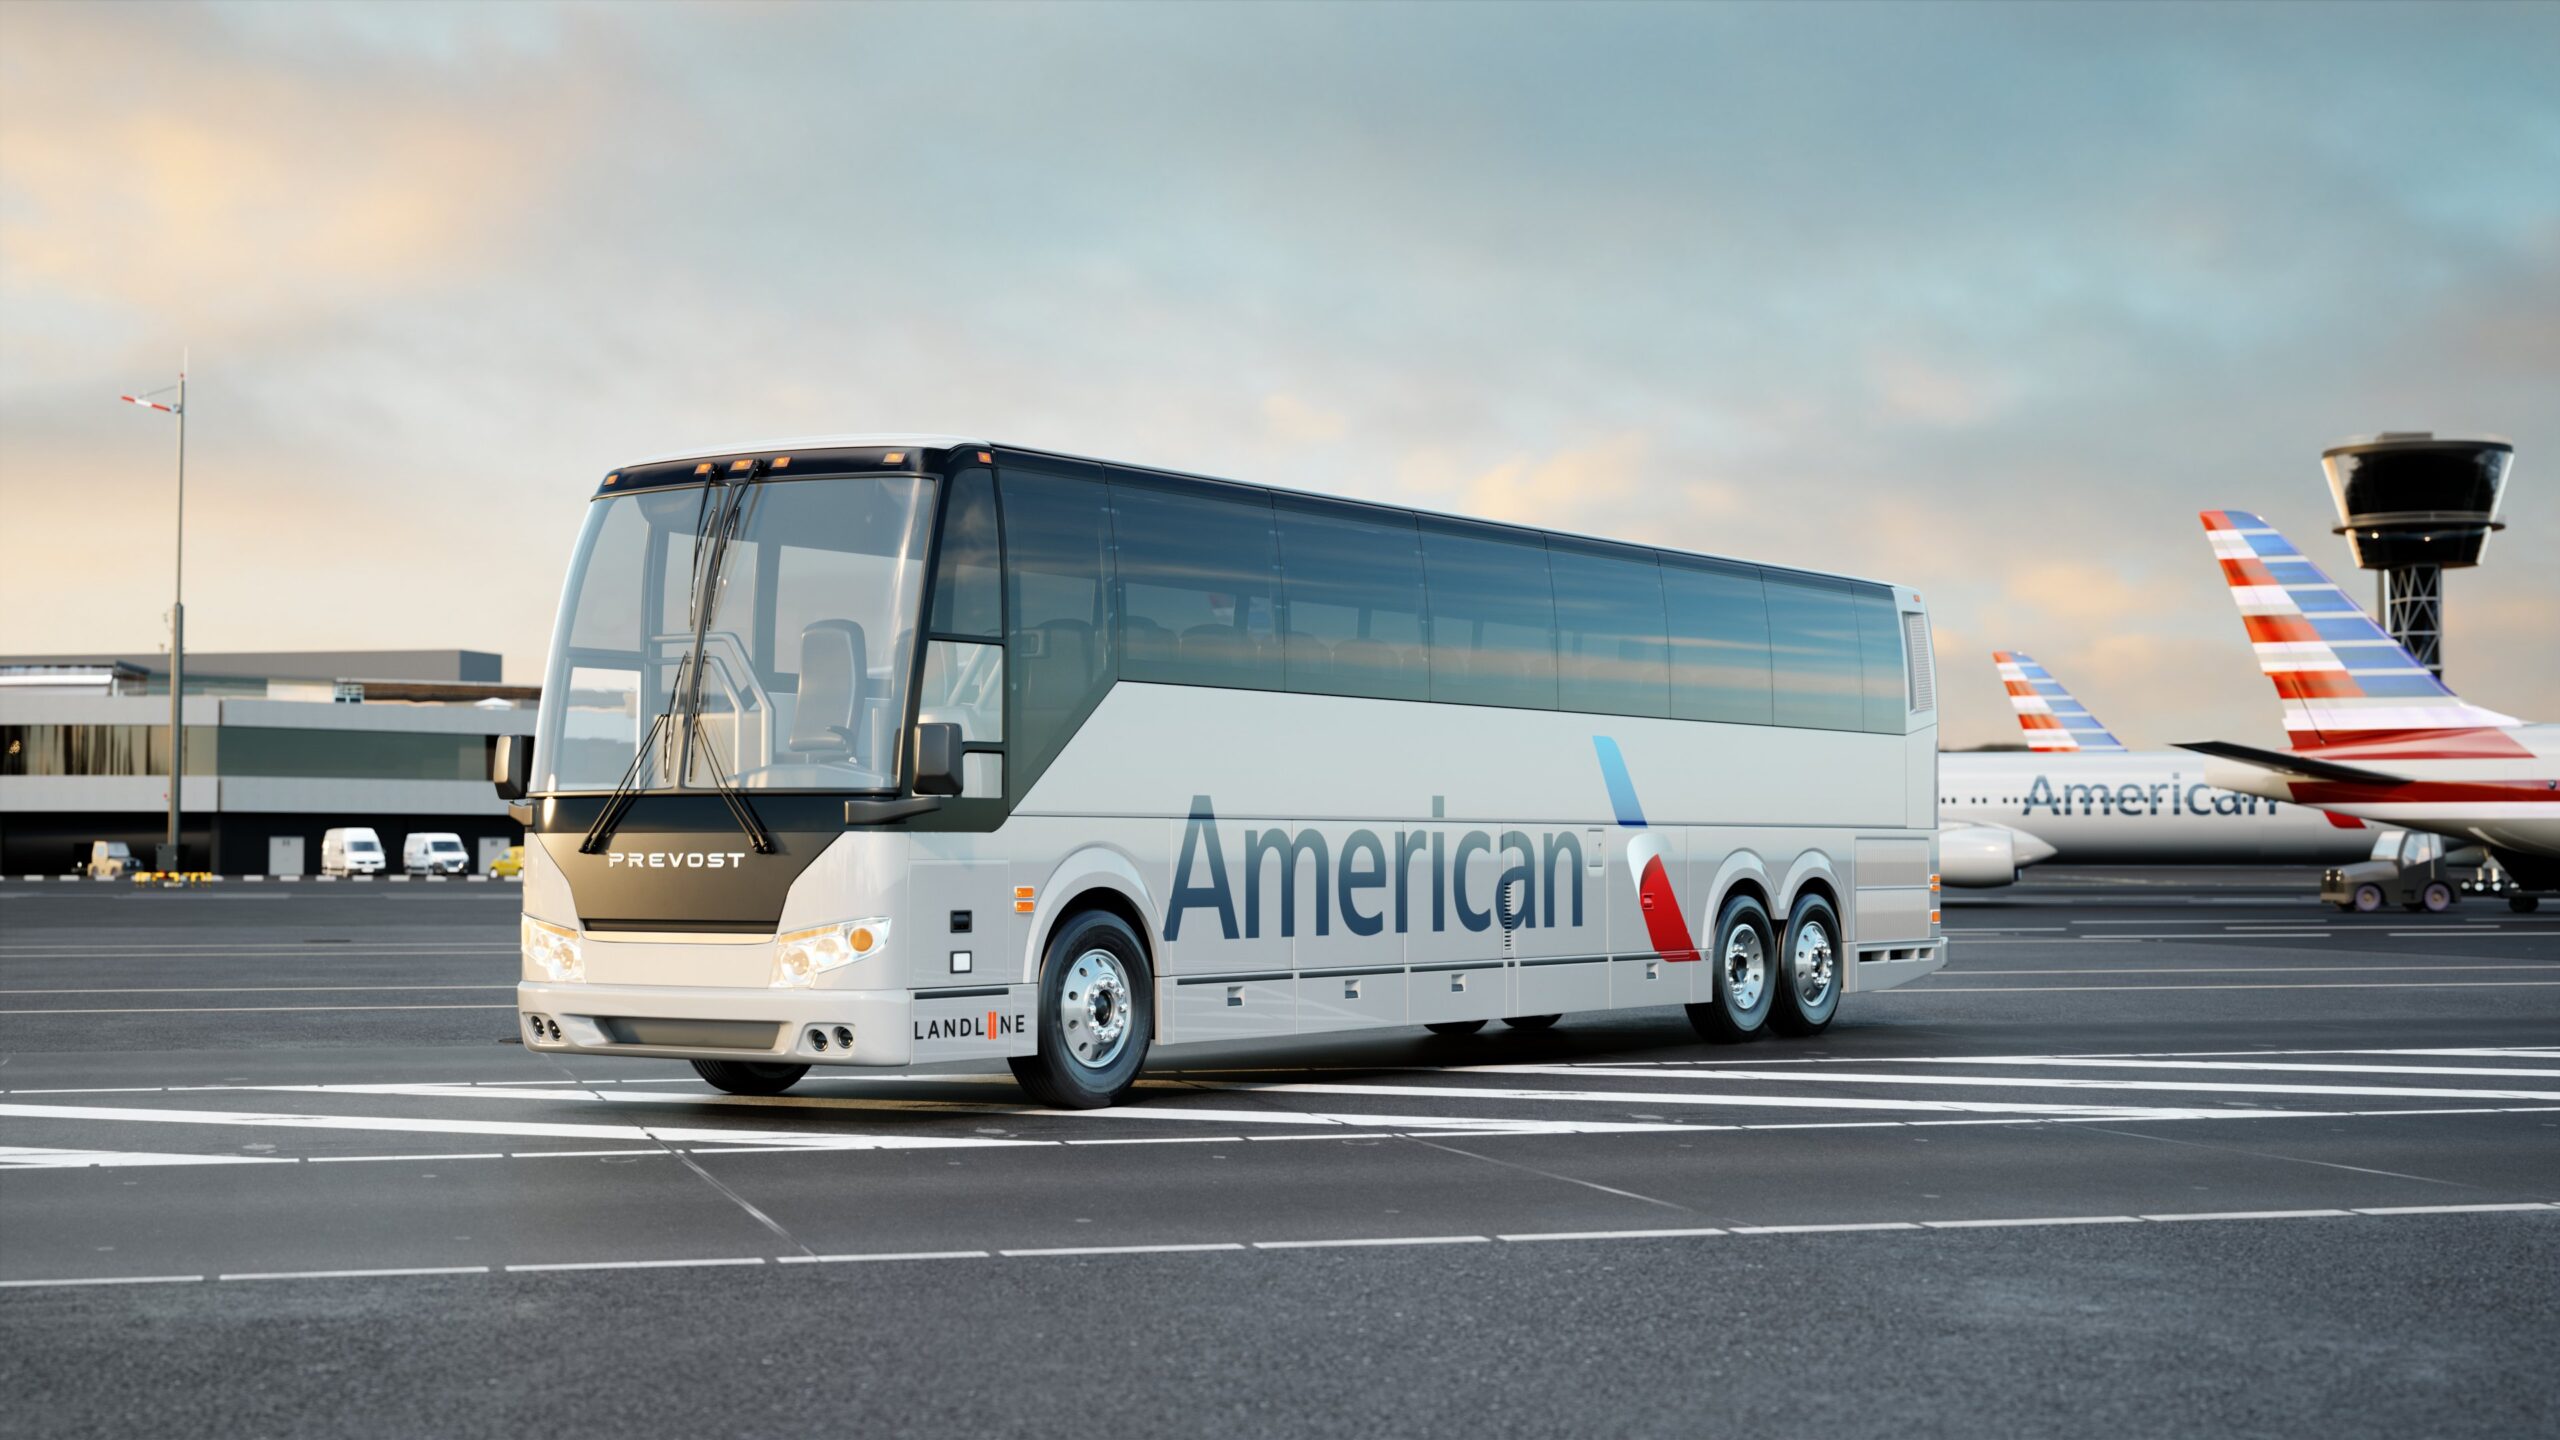 American Airlines Introduces TSA-Cleared Landline Bus Service to Philadelphia